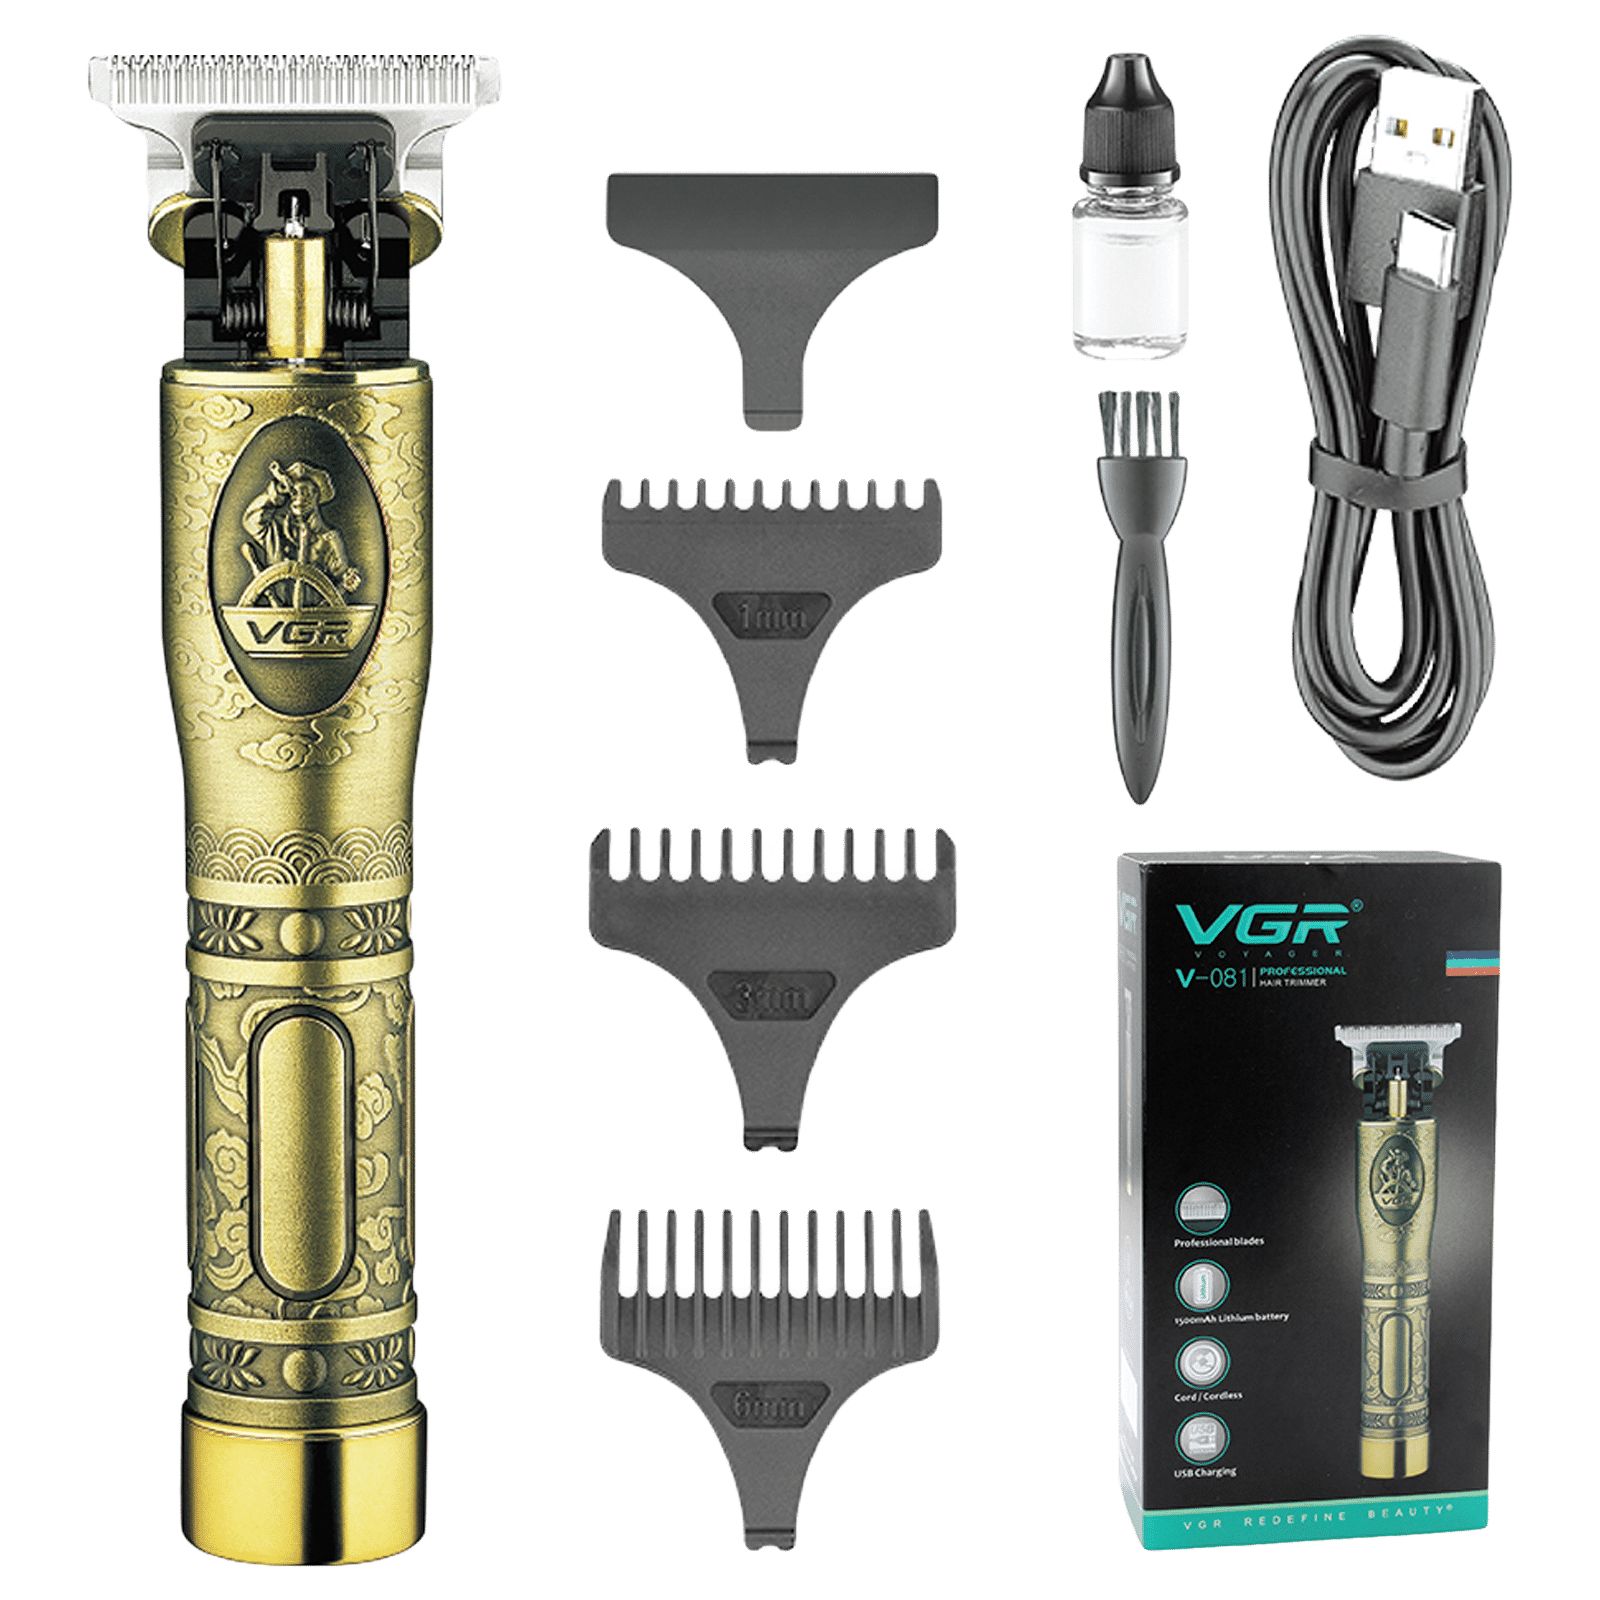 VGR V-081 Rechargeable Corded & Cordless Wet & Dry Trimmer for Hair Clipping, Beard, Moustache & Body Grooming with 3 Length Settings for Men (180min Runtime, Quick Charge, Gold)_1